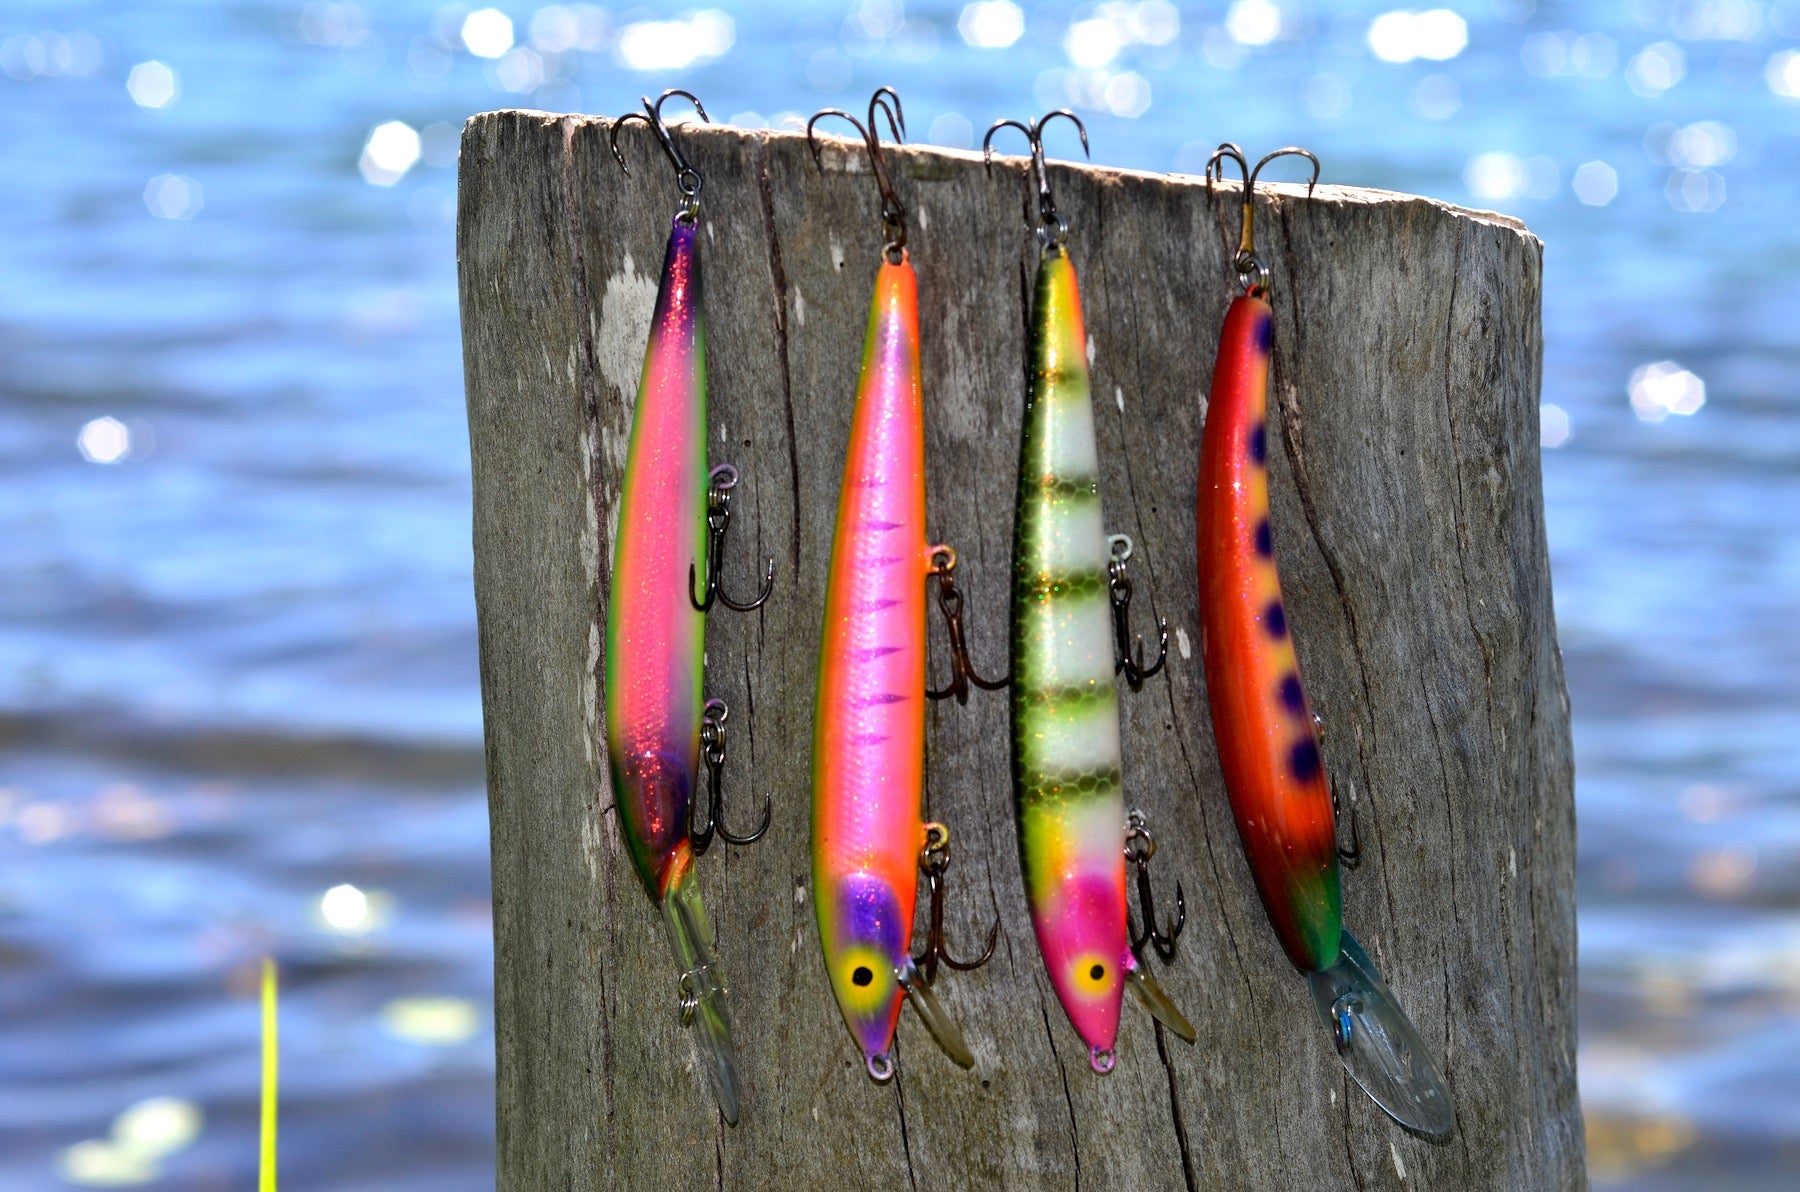 Best Wooden Lures for Pike Fishing - Handmade and Effective